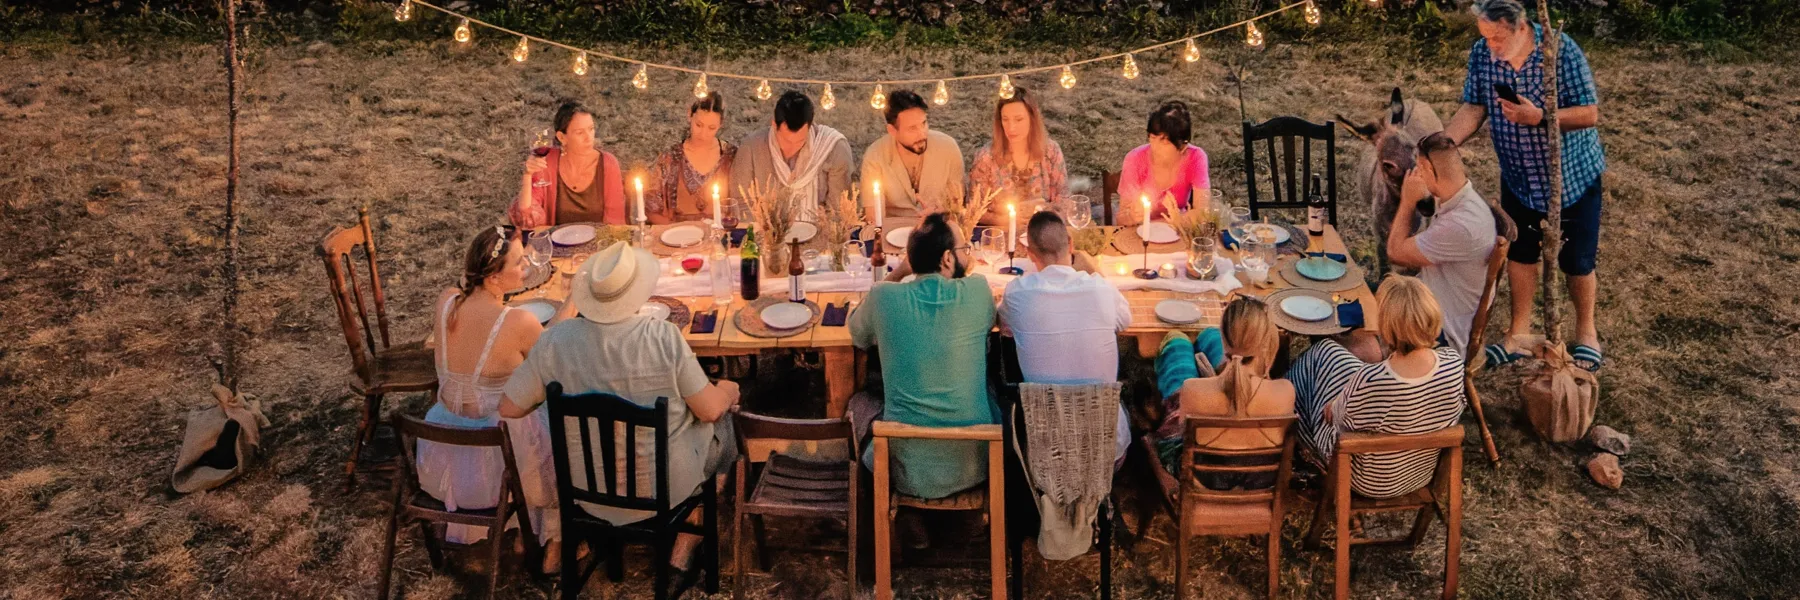 A table of people enjoying a meal